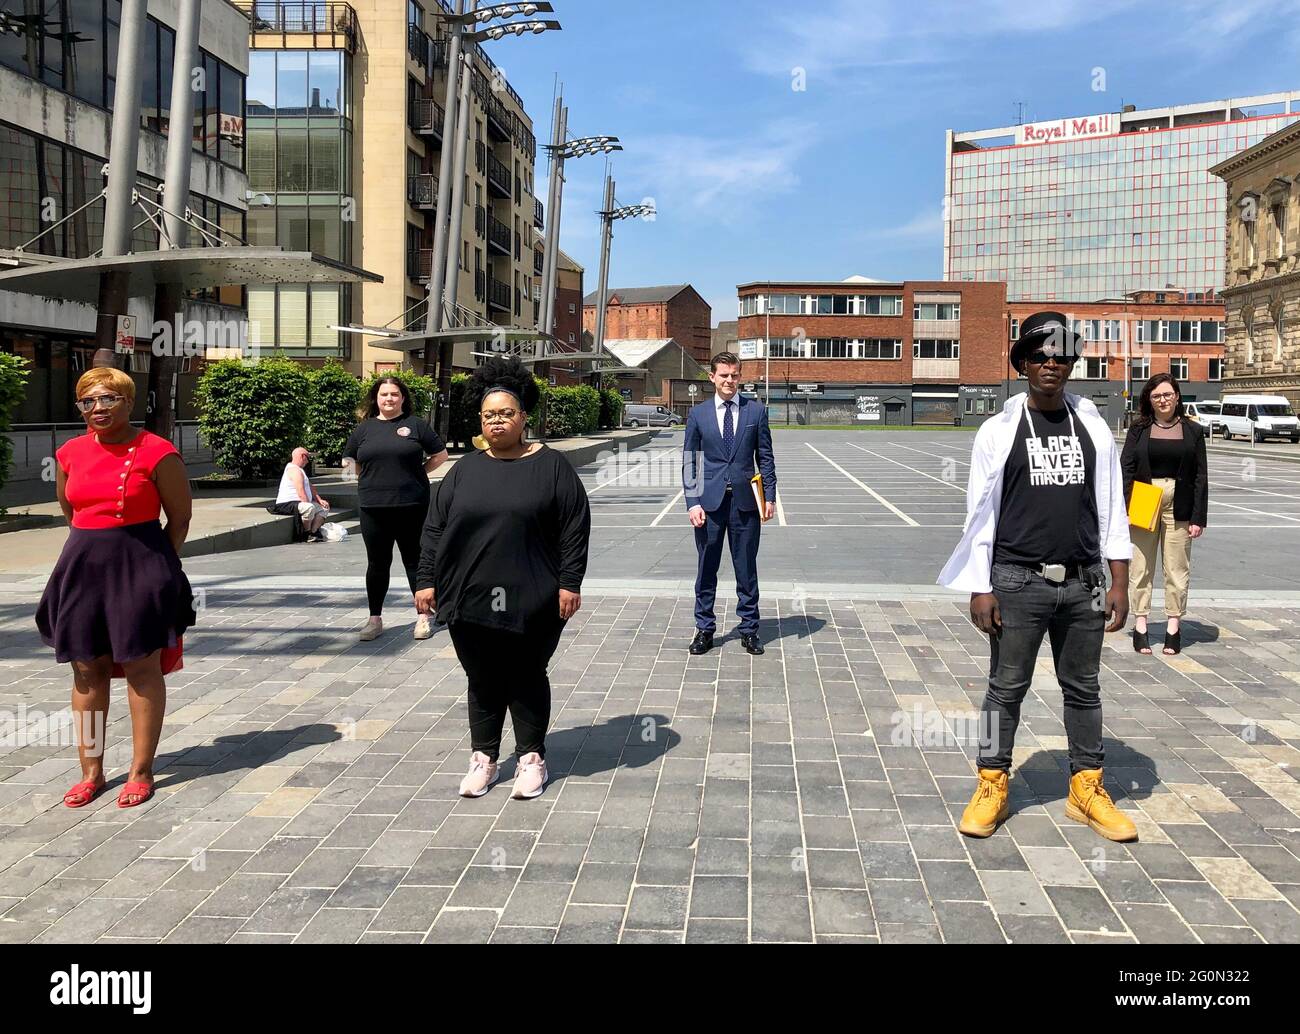 (Front left to right) Sipho Sibanda, Willetta Gabriel, Tura Arutura outside Custom House Square in Belfast, Northern Ireland, where one of last summerÕs Black Lives Matter protests took place. The Black Lives Matter protesters stand with their legal team (back, solicitor Darragh Mackin) after it was announced they would not face prosecution for participating in demonstrations in Northern Ireland last summer when Covid-19 limits on public gatherings were in place. Picture date: Wednesday June 2, 2021. Stock Photo